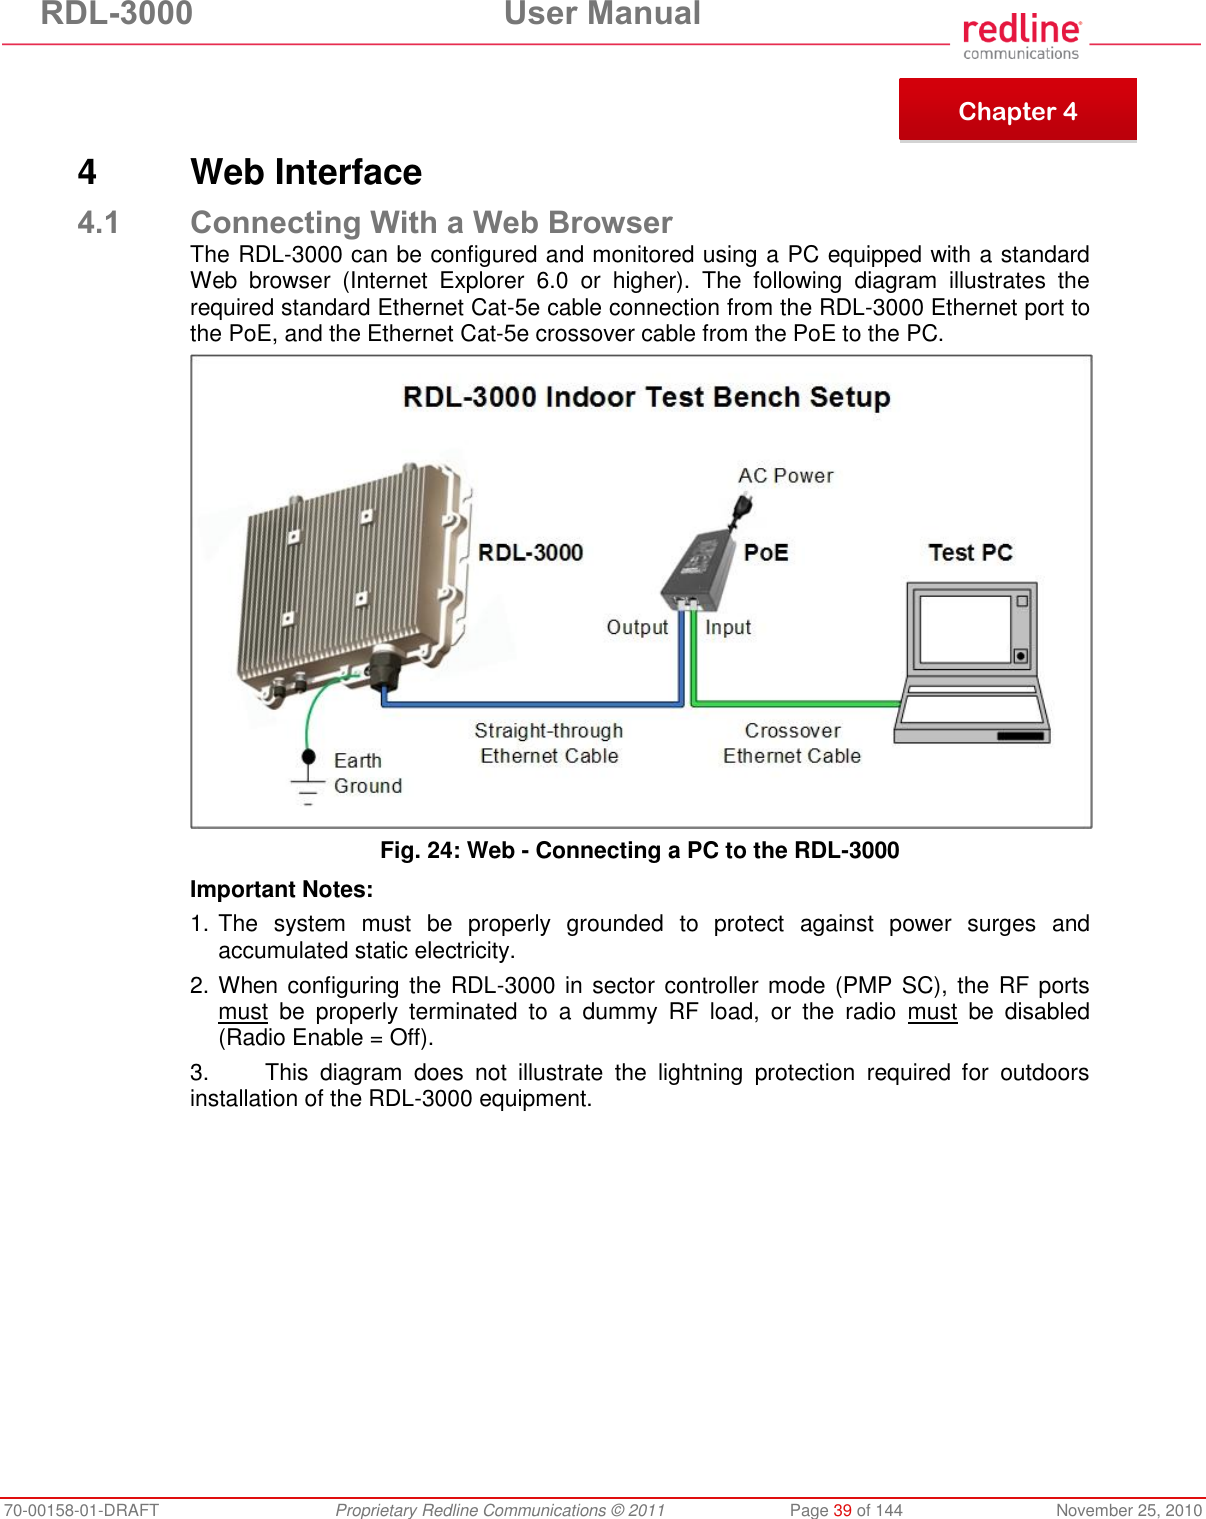 RDL-3000  User Manual 70-00158-01-DRAFT  Proprietary Redline Communications © 2011  Page 39 of 144  November 25, 2010     4  Web Interface 4.1 Connecting With a Web Browser The RDL-3000 can be configured and monitored using a PC equipped with a standard Web  browser  (Internet  Explorer  6.0  or  higher).  The  following  diagram  illustrates  the required standard Ethernet Cat-5e cable connection from the RDL-3000 Ethernet port to the PoE, and the Ethernet Cat-5e crossover cable from the PoE to the PC.  Fig. 24: Web - Connecting a PC to the RDL-3000 Important Notes: 1. The  system  must  be  properly  grounded  to  protect  against  power  surges  and accumulated static electricity. 2. When configuring the RDL-3000 in sector controller mode (PMP SC), the RF ports must  be  properly  terminated  to  a  dummy  RF  load,  or  the  radio  must  be  disabled (Radio Enable = Off).  3.  This  diagram  does  not  illustrate  the  lightning  protection  required  for  outdoors installation of the RDL-3000 equipment.   Chapter 4 